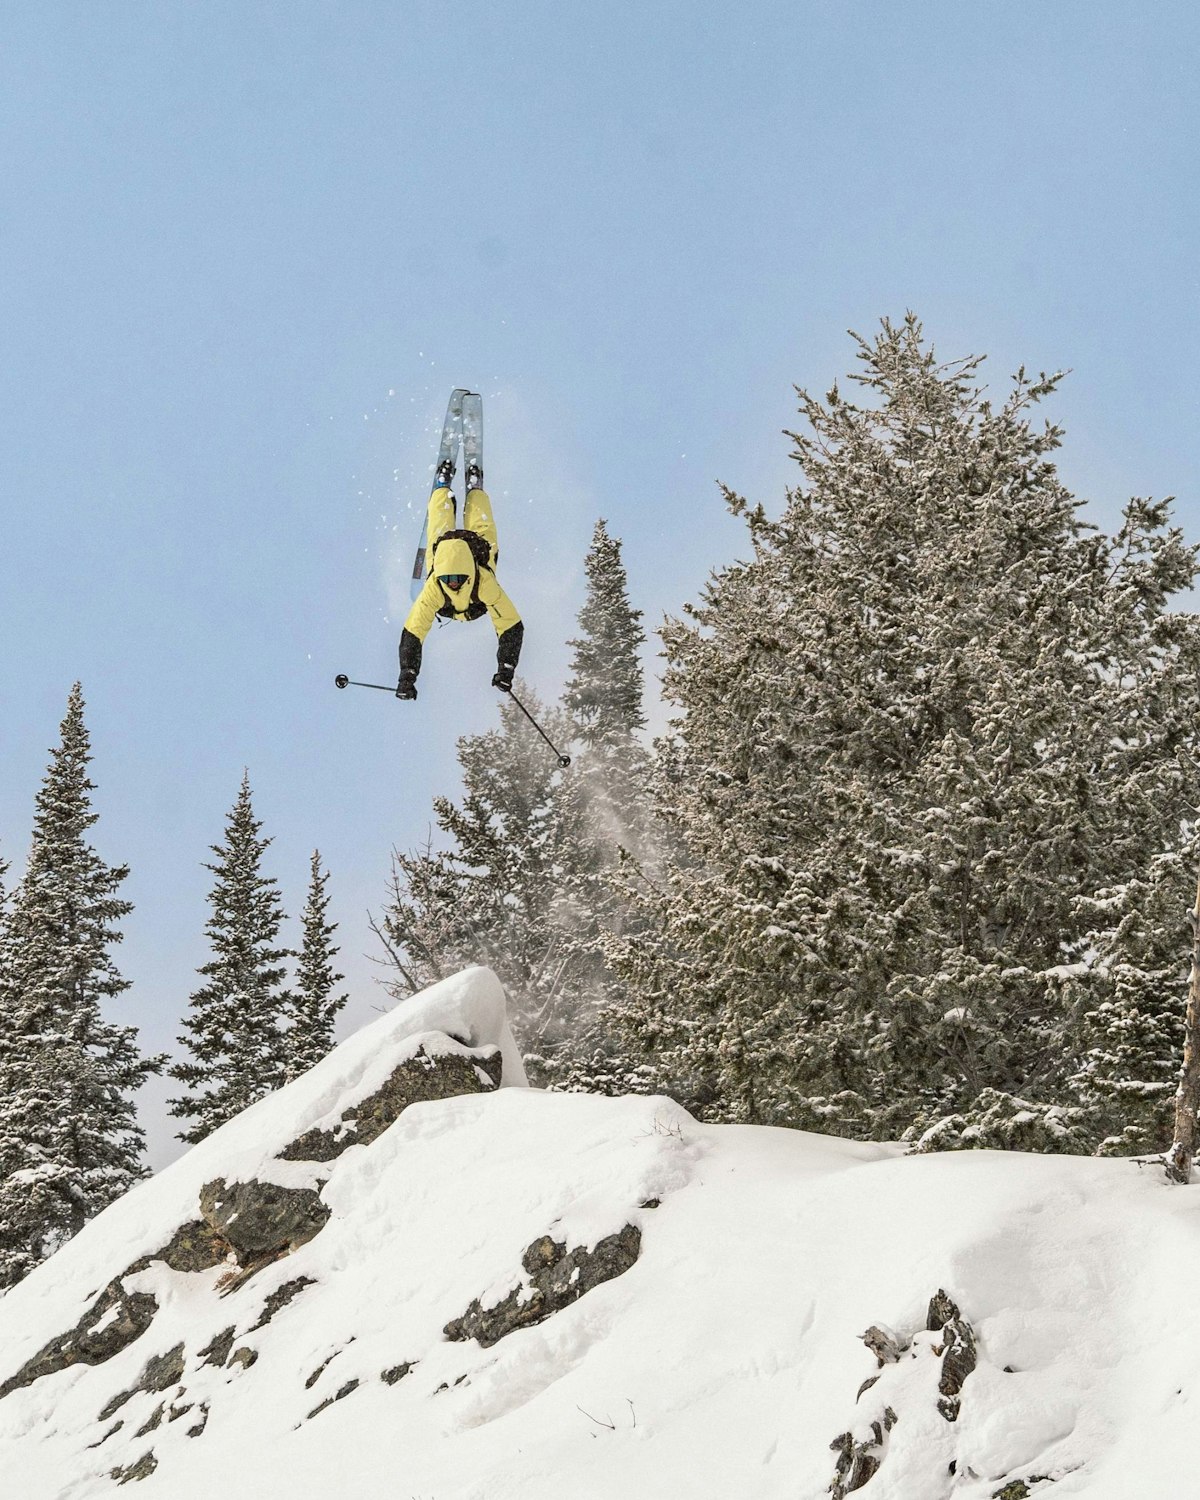 Skier getting inverted off a cliff